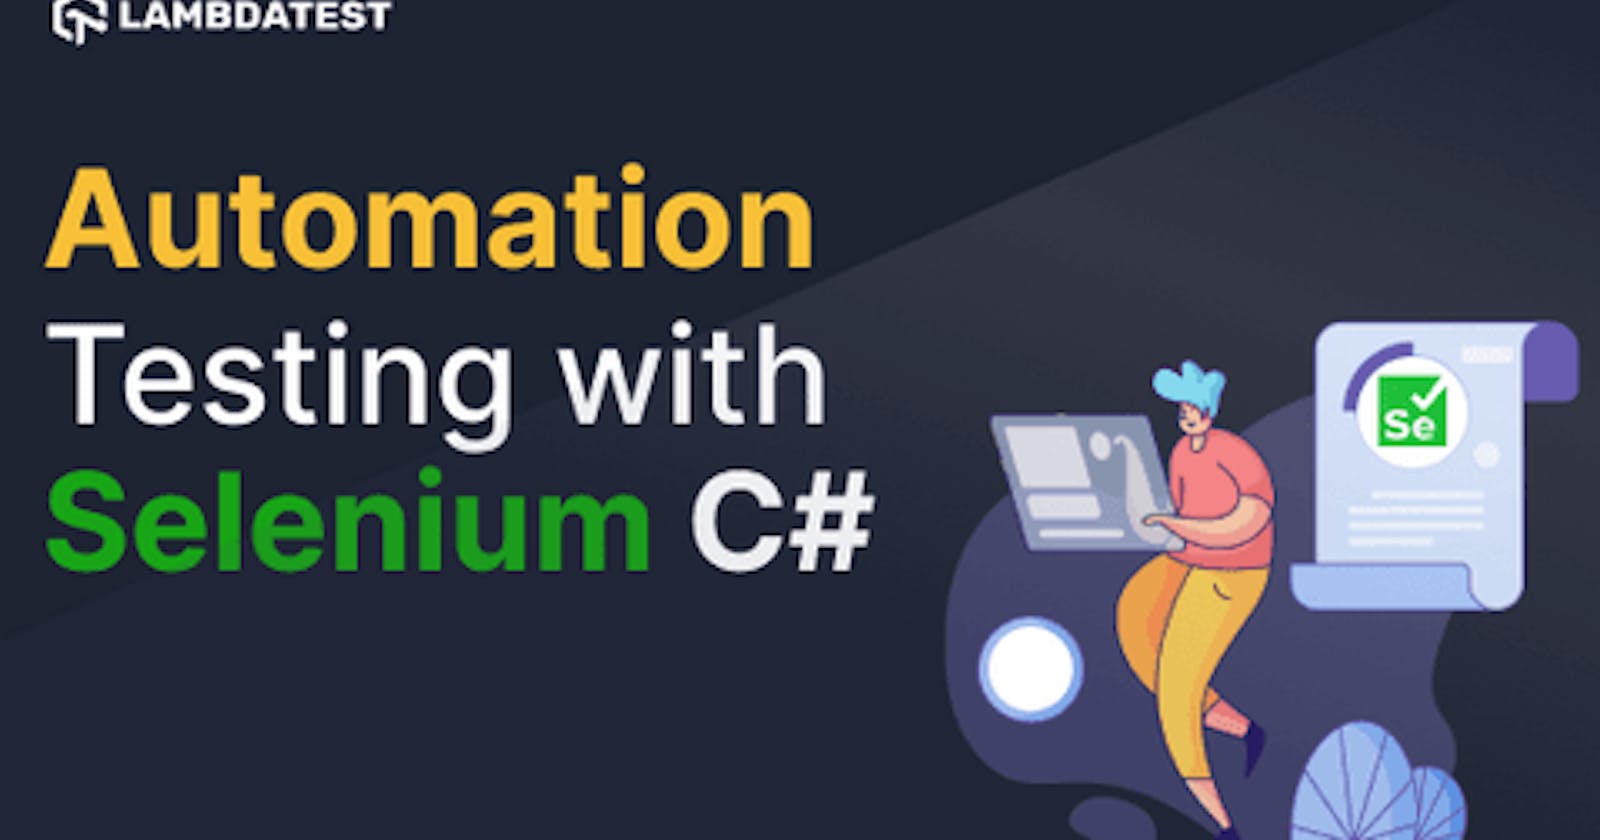 How To Start Running Automated Tests With Selenium C#